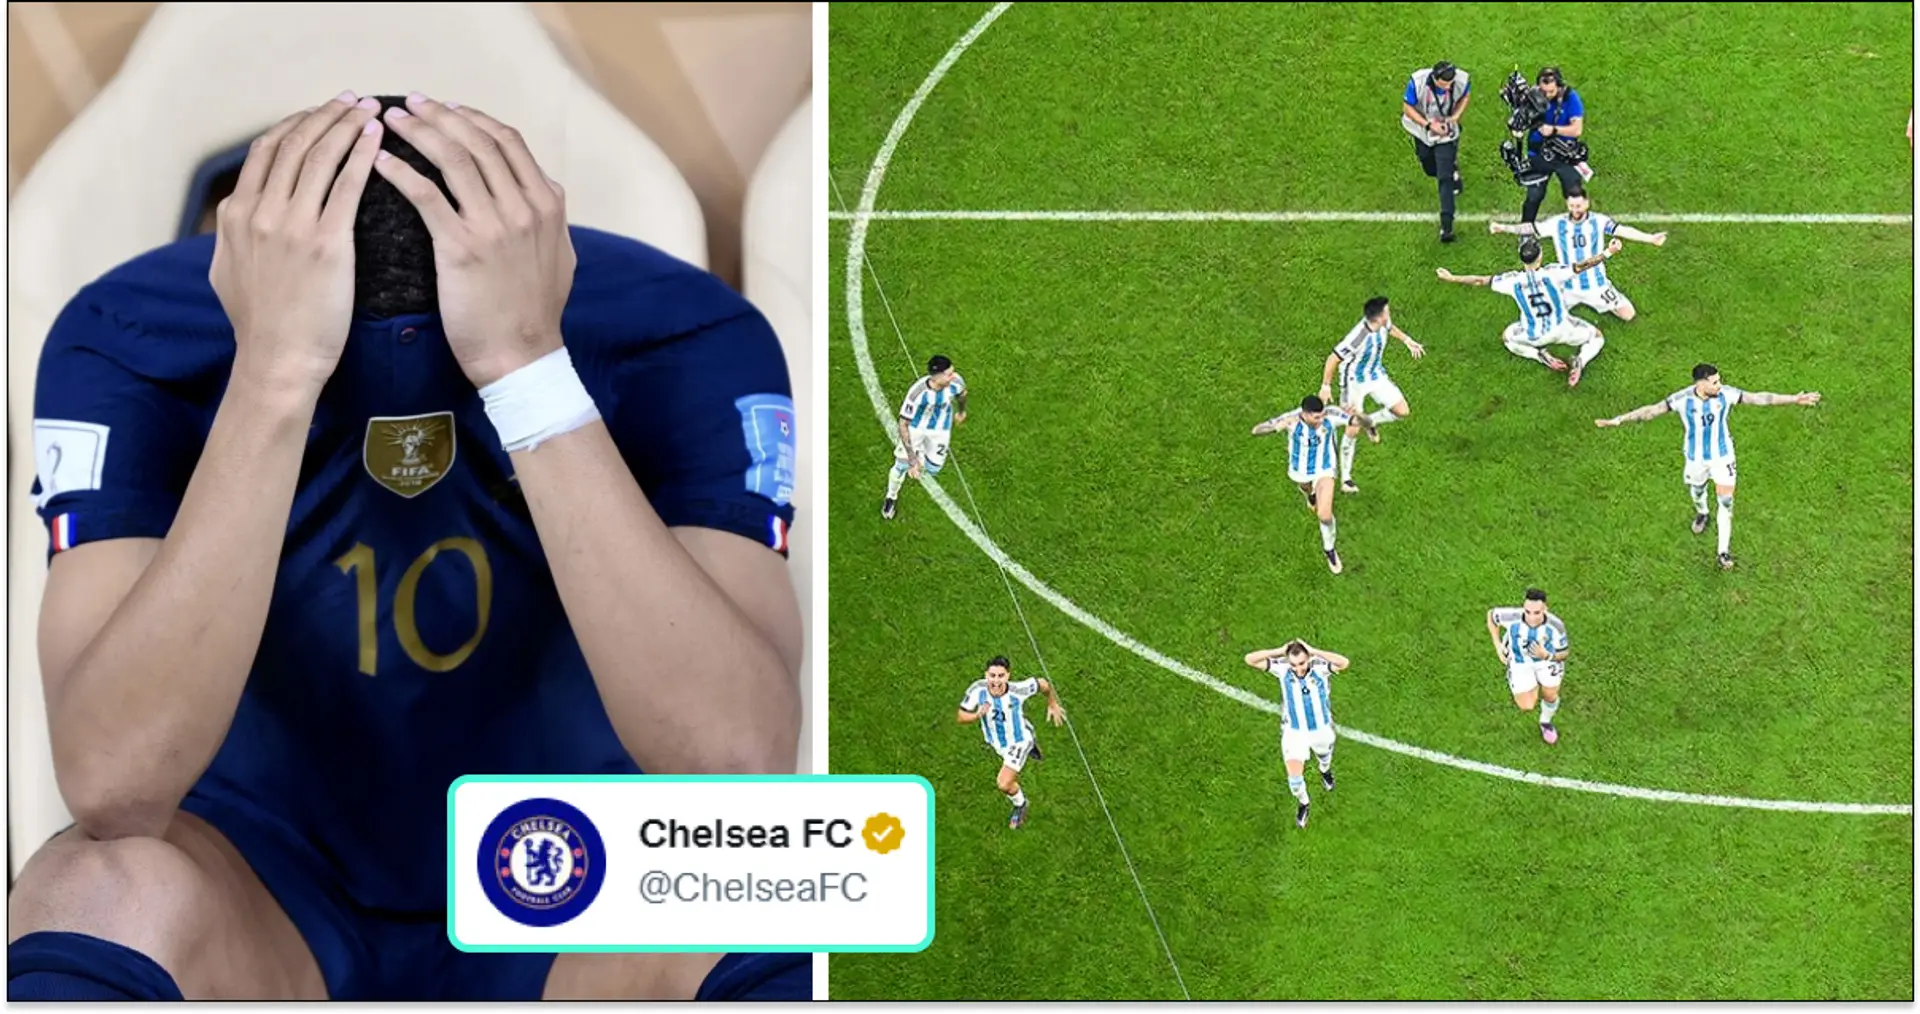 Chelsea's Twitter account posts one-word message after World Cup final — it perfectly sums up this insane game